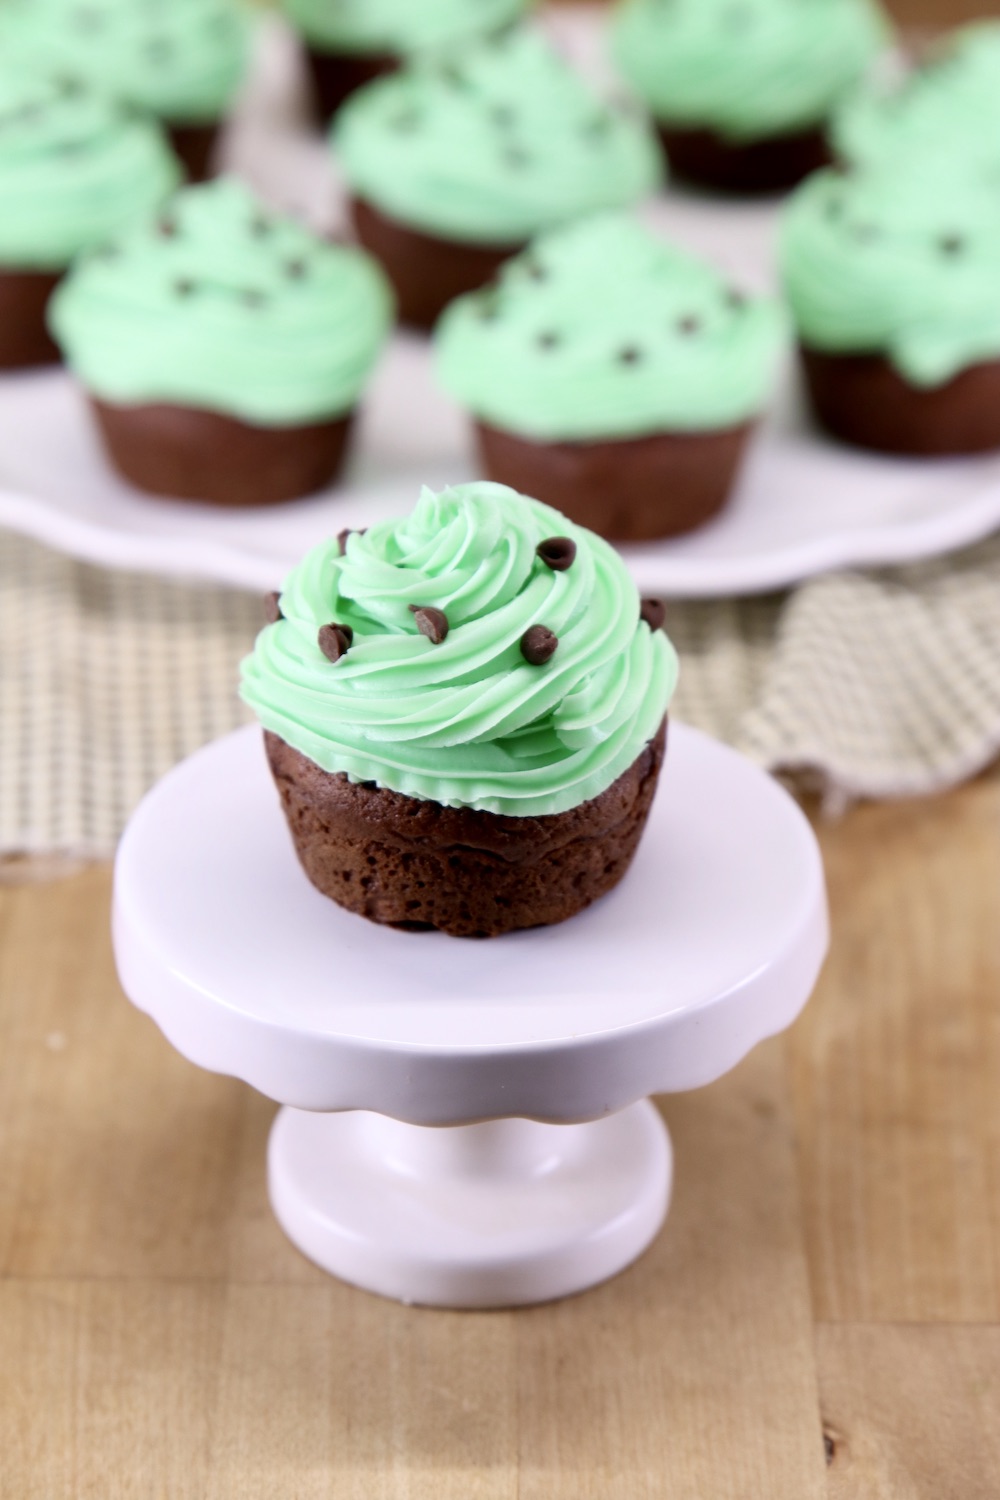 Chocolate cupcake with mint icing on a cupcake pedestal